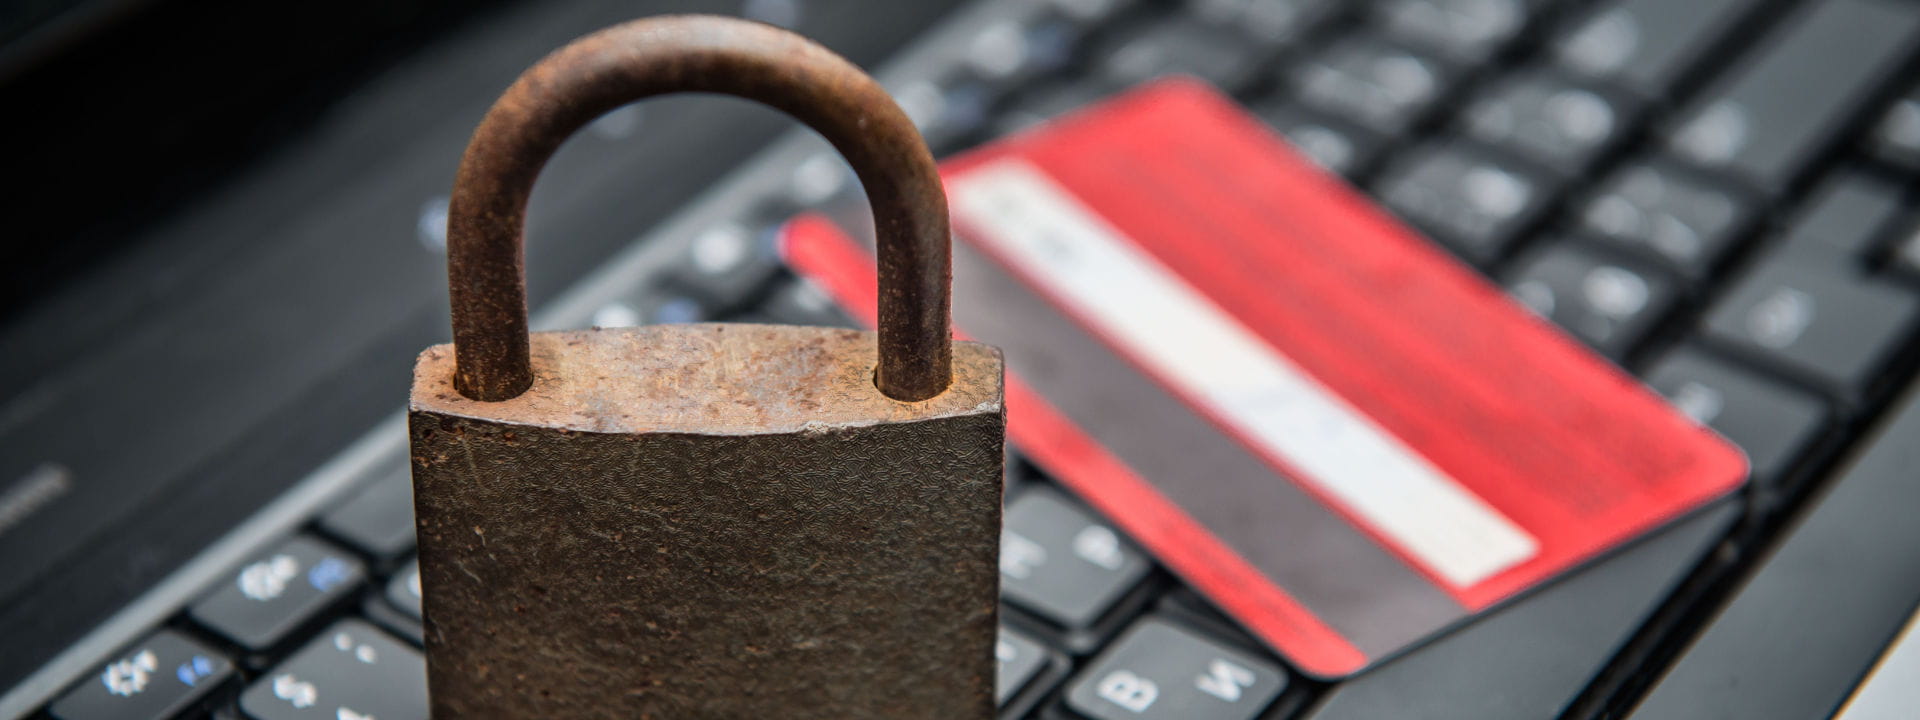 A rusty padlock and red credit card on a keyboard depicting ecommerce fraud.